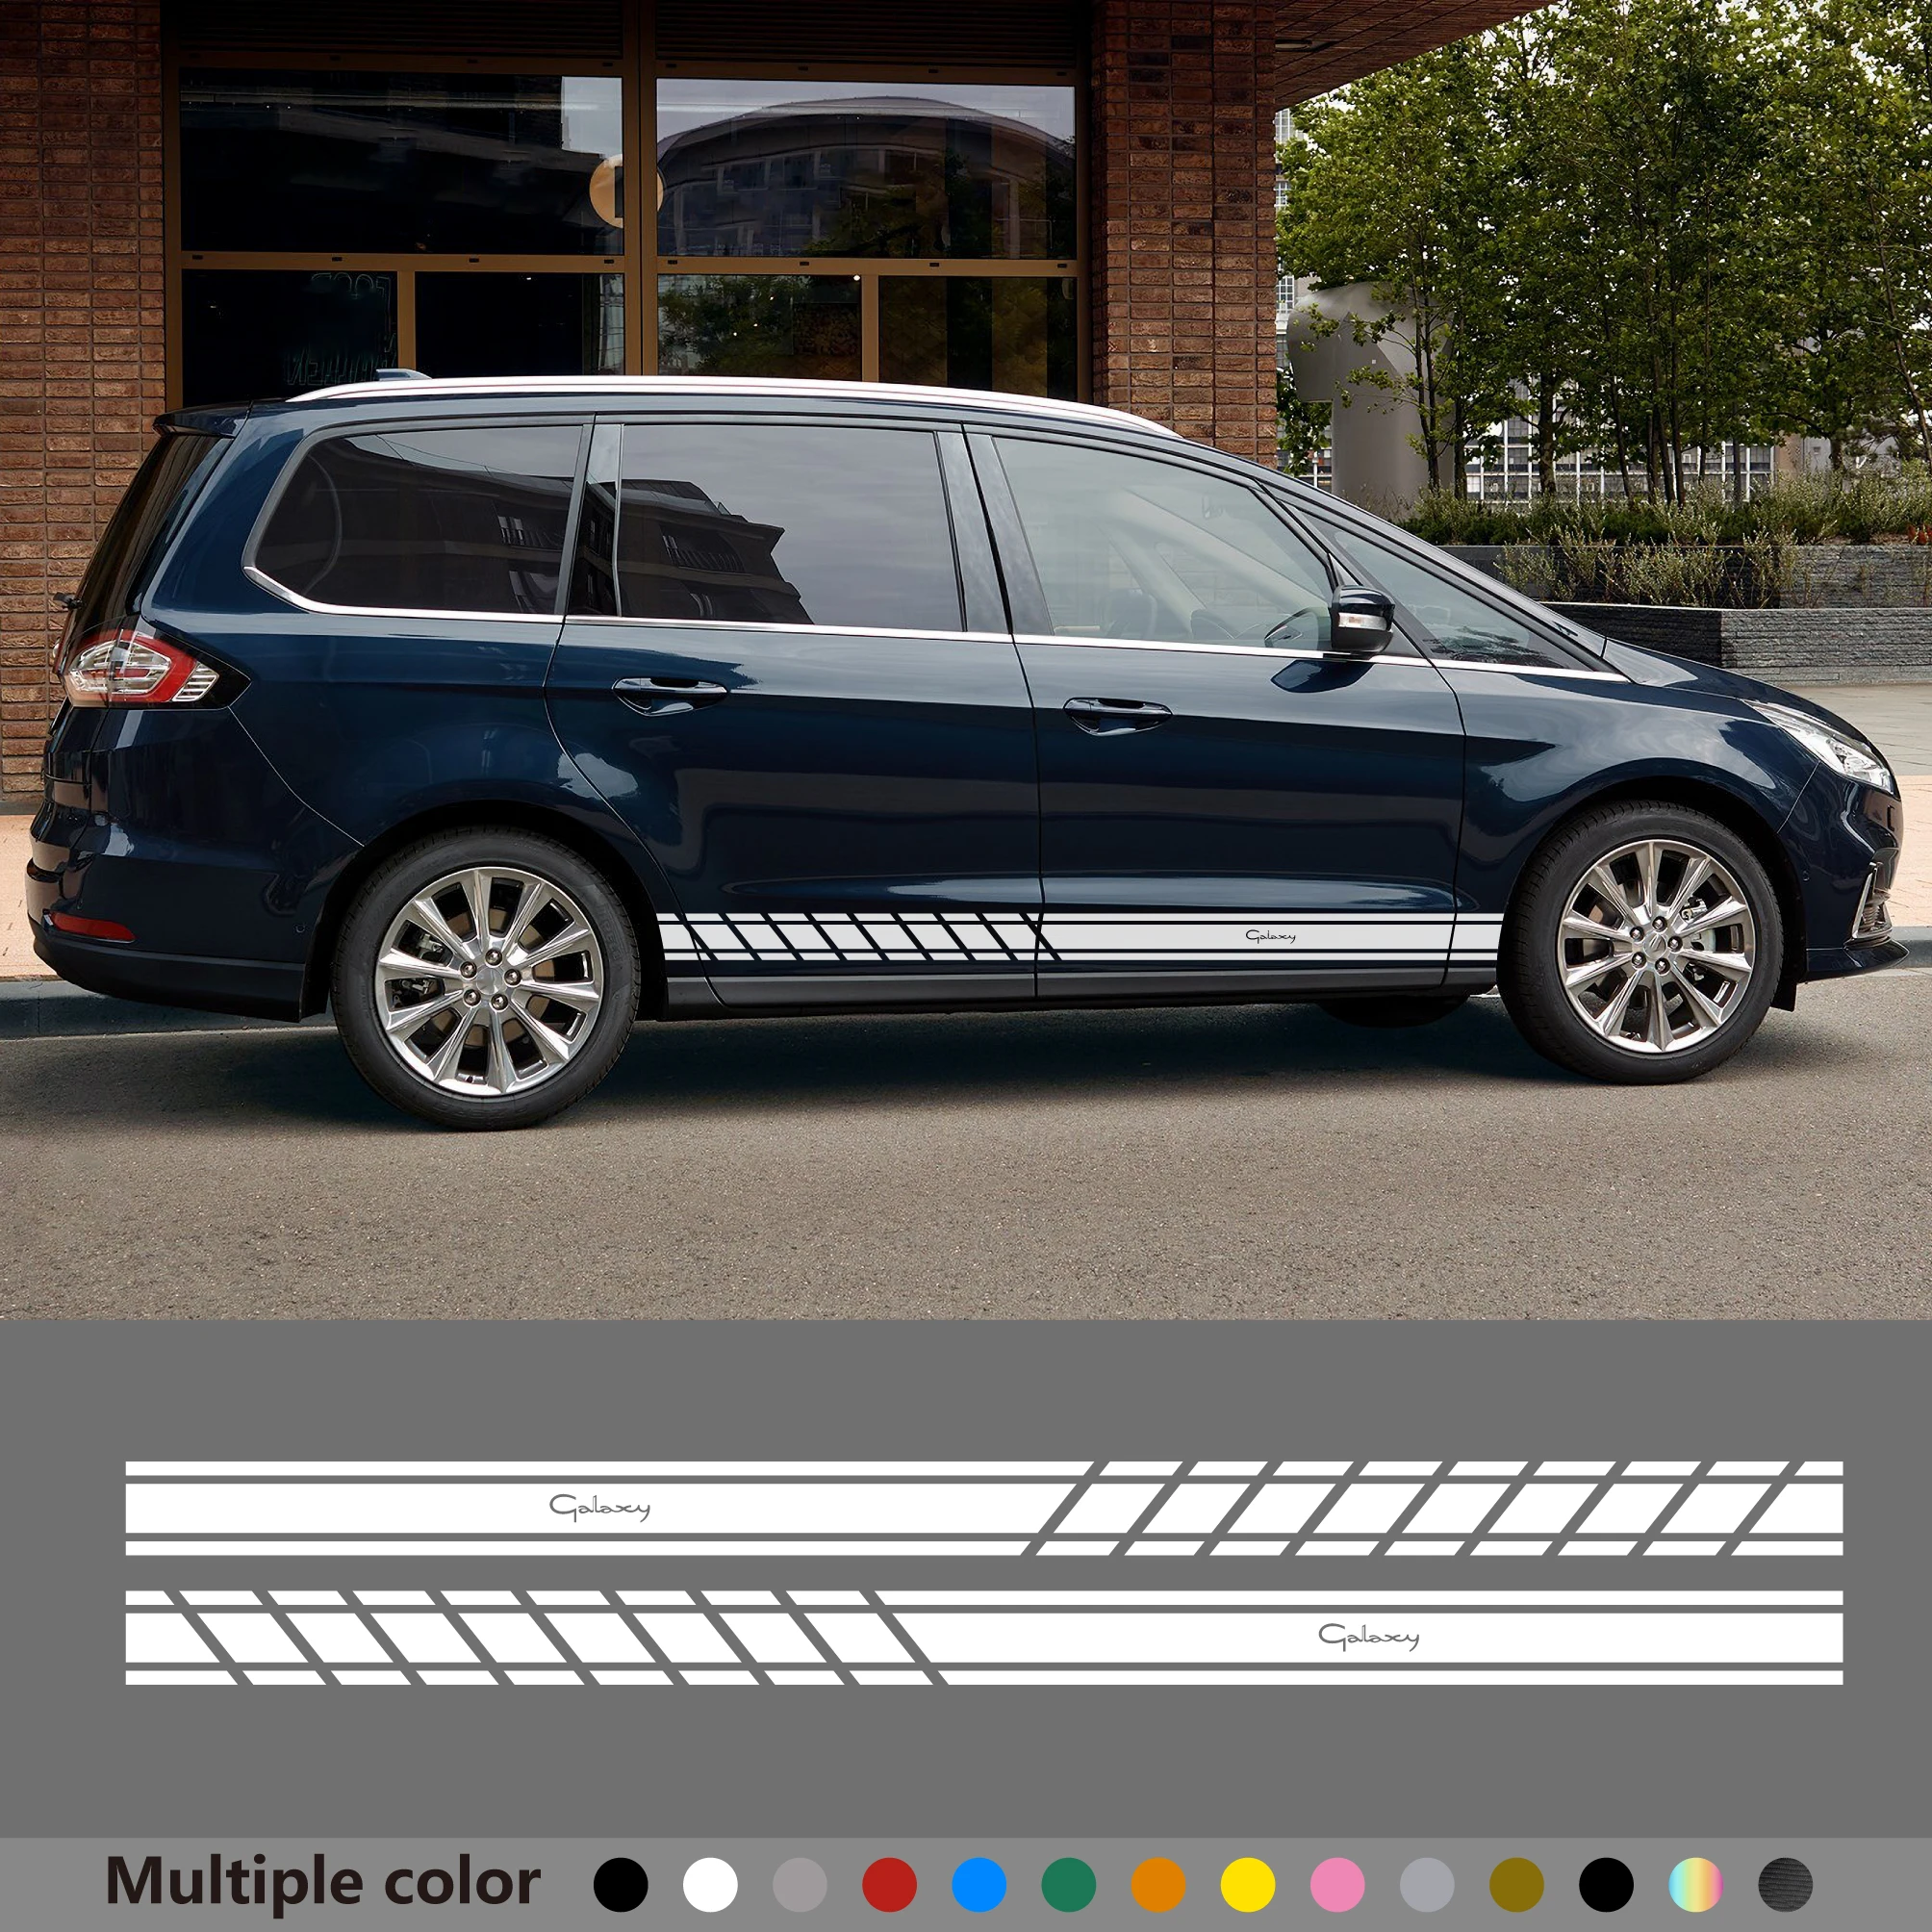 

2Pcs Car Door Long Side Stripes Stickers Apply For Ford Galaxy MK1 MK2 Mk3 MK4 DIY Exterior Tuning Accessories Auto Vinyl Decals